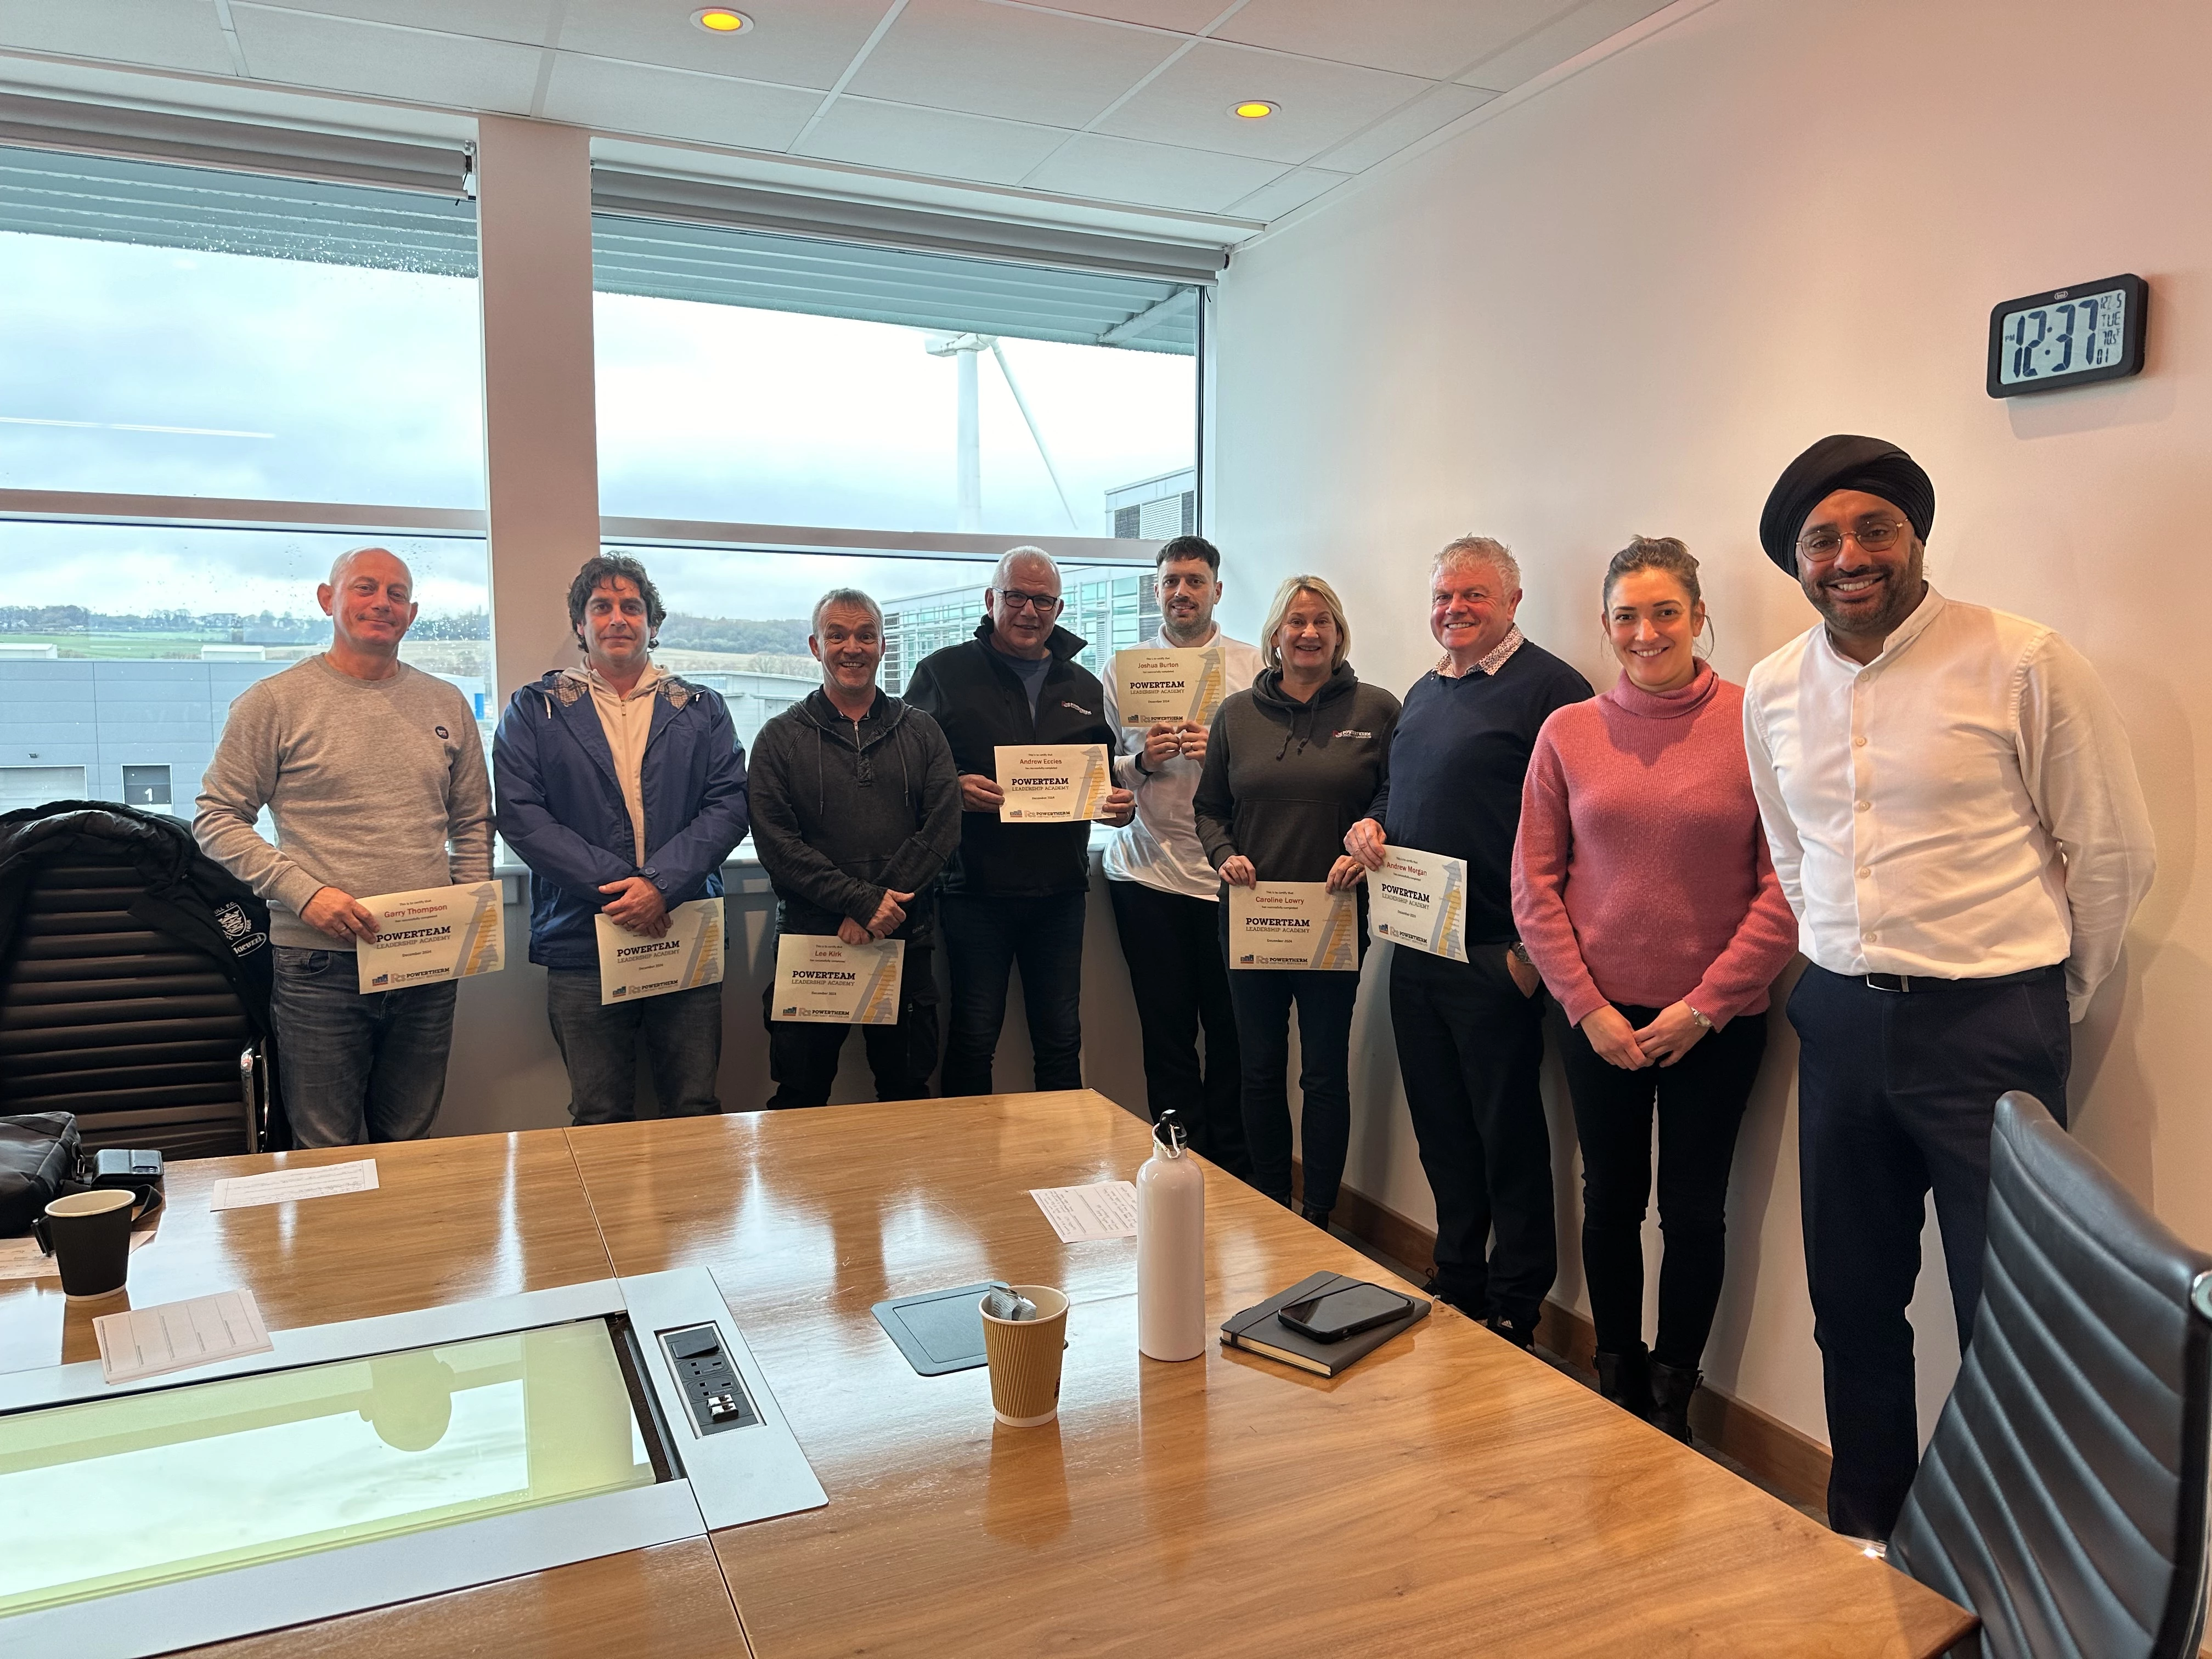 Leaders completed 'PowerTeam Leadership Academy', delivered by Bobby Singh from BSA Training